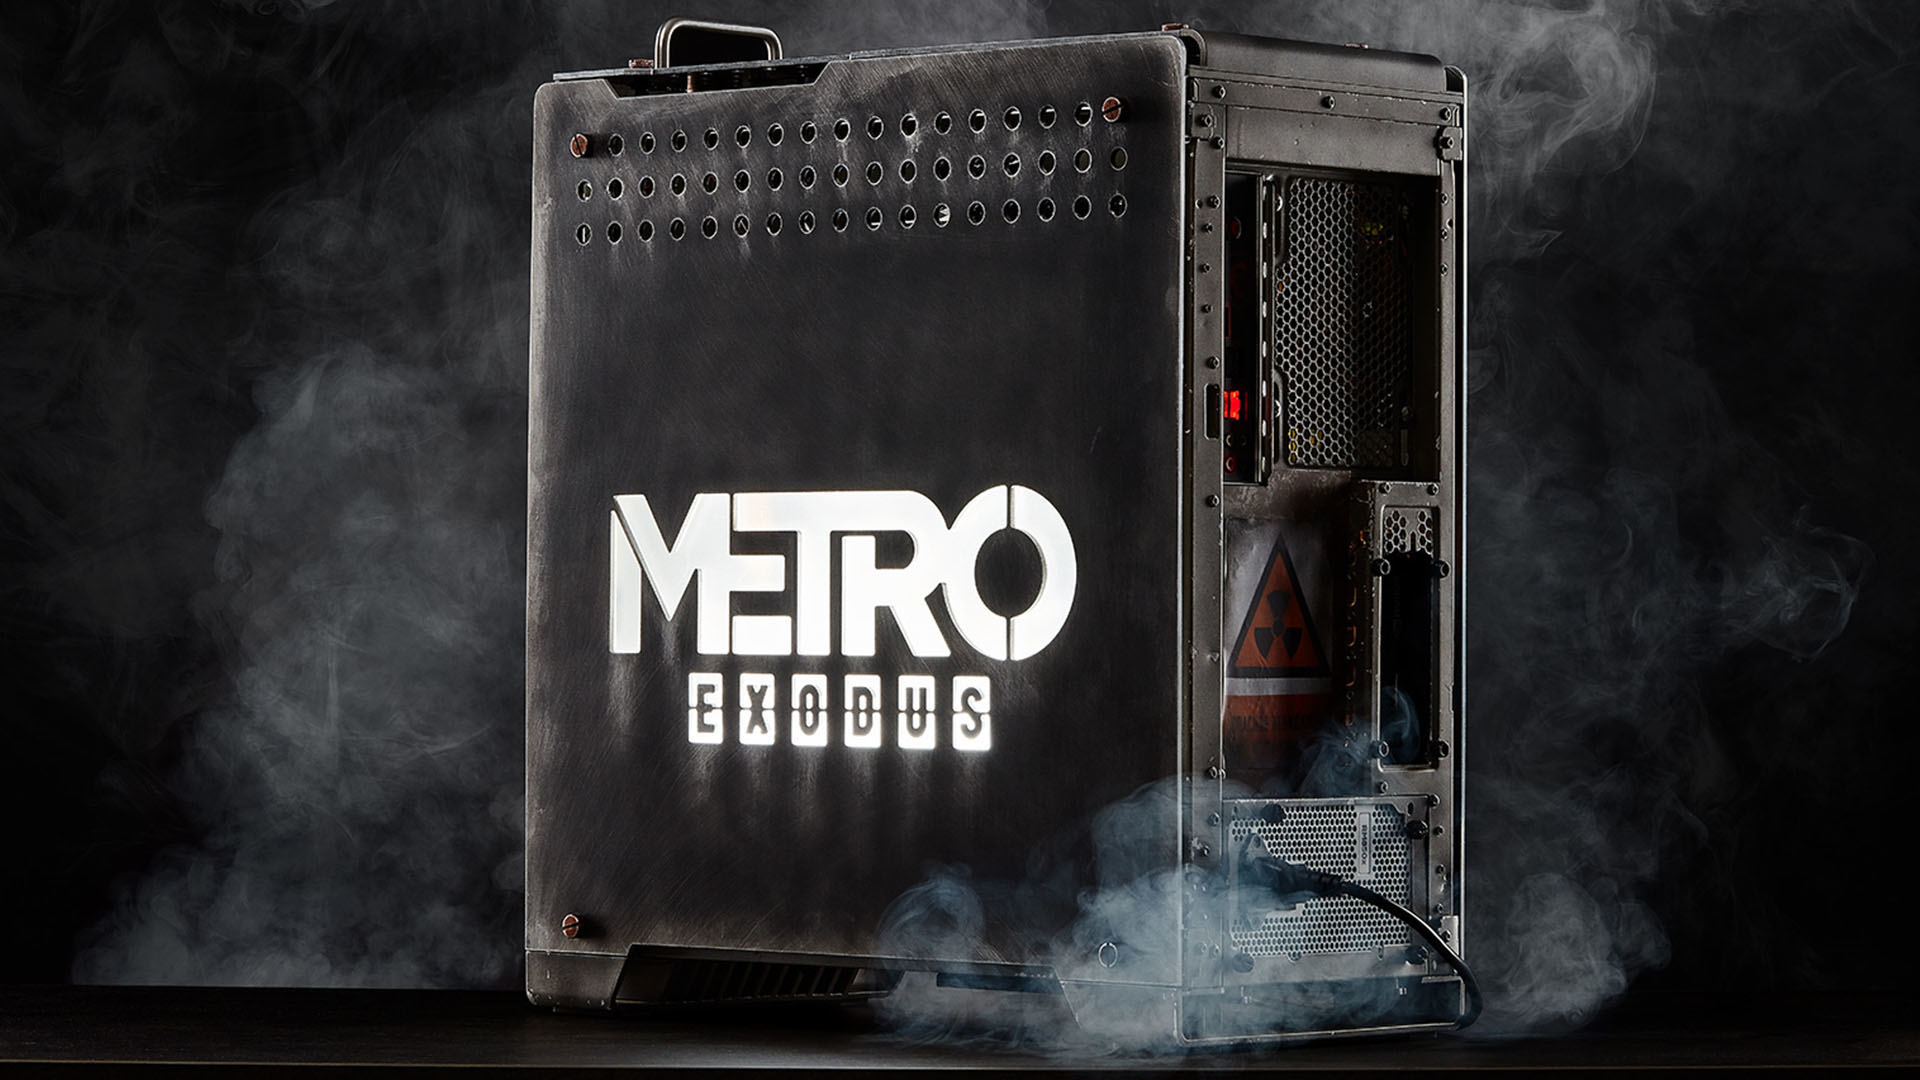 The side of the Metro Exodus gaming PC build